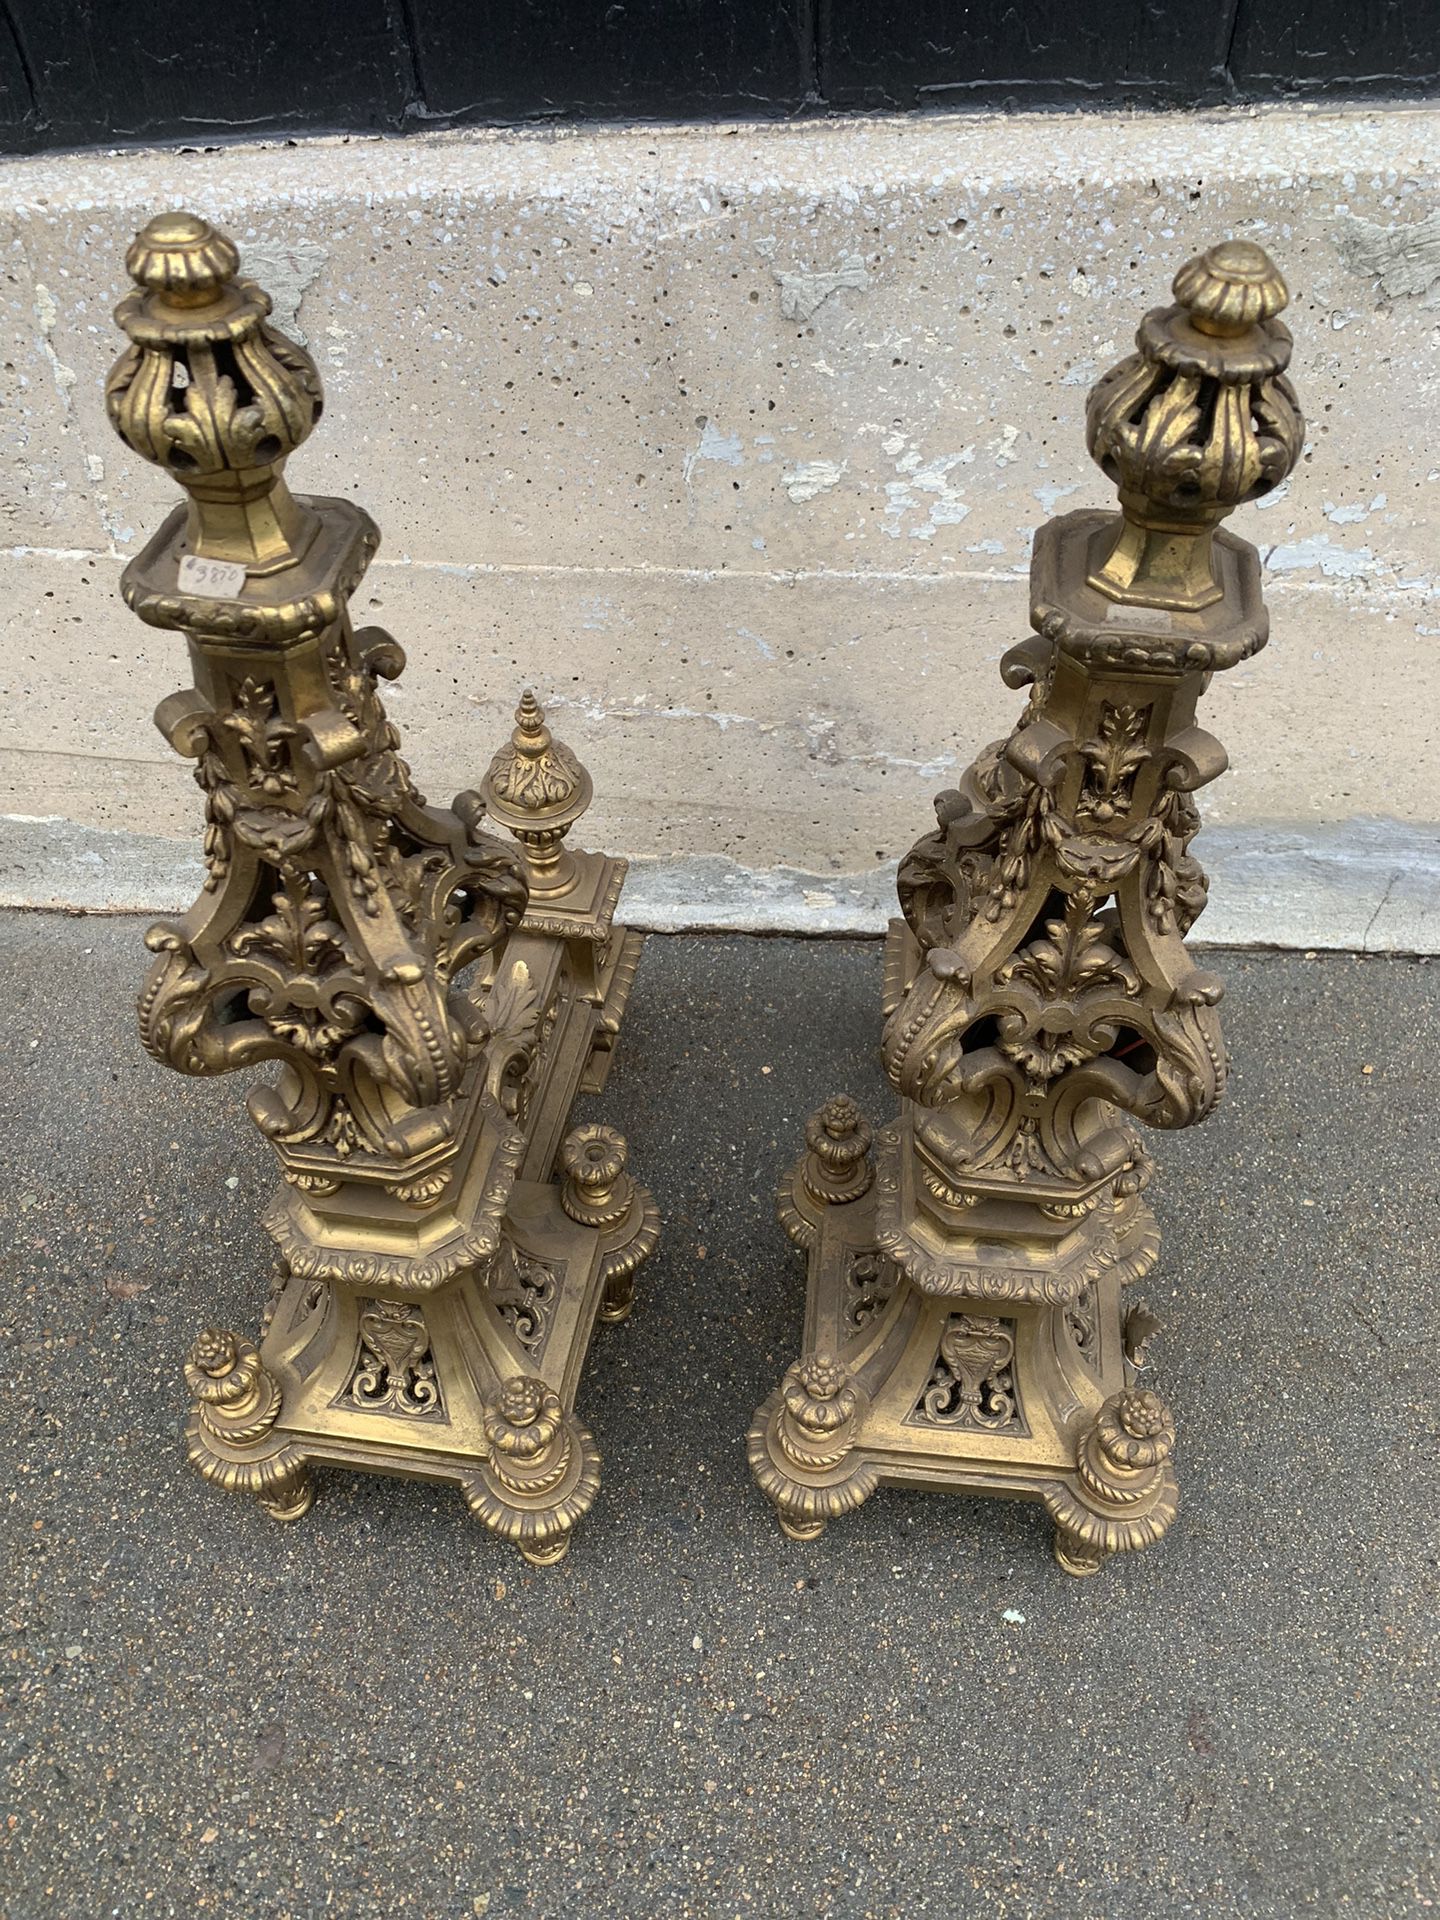 Antique French Brass Andirons